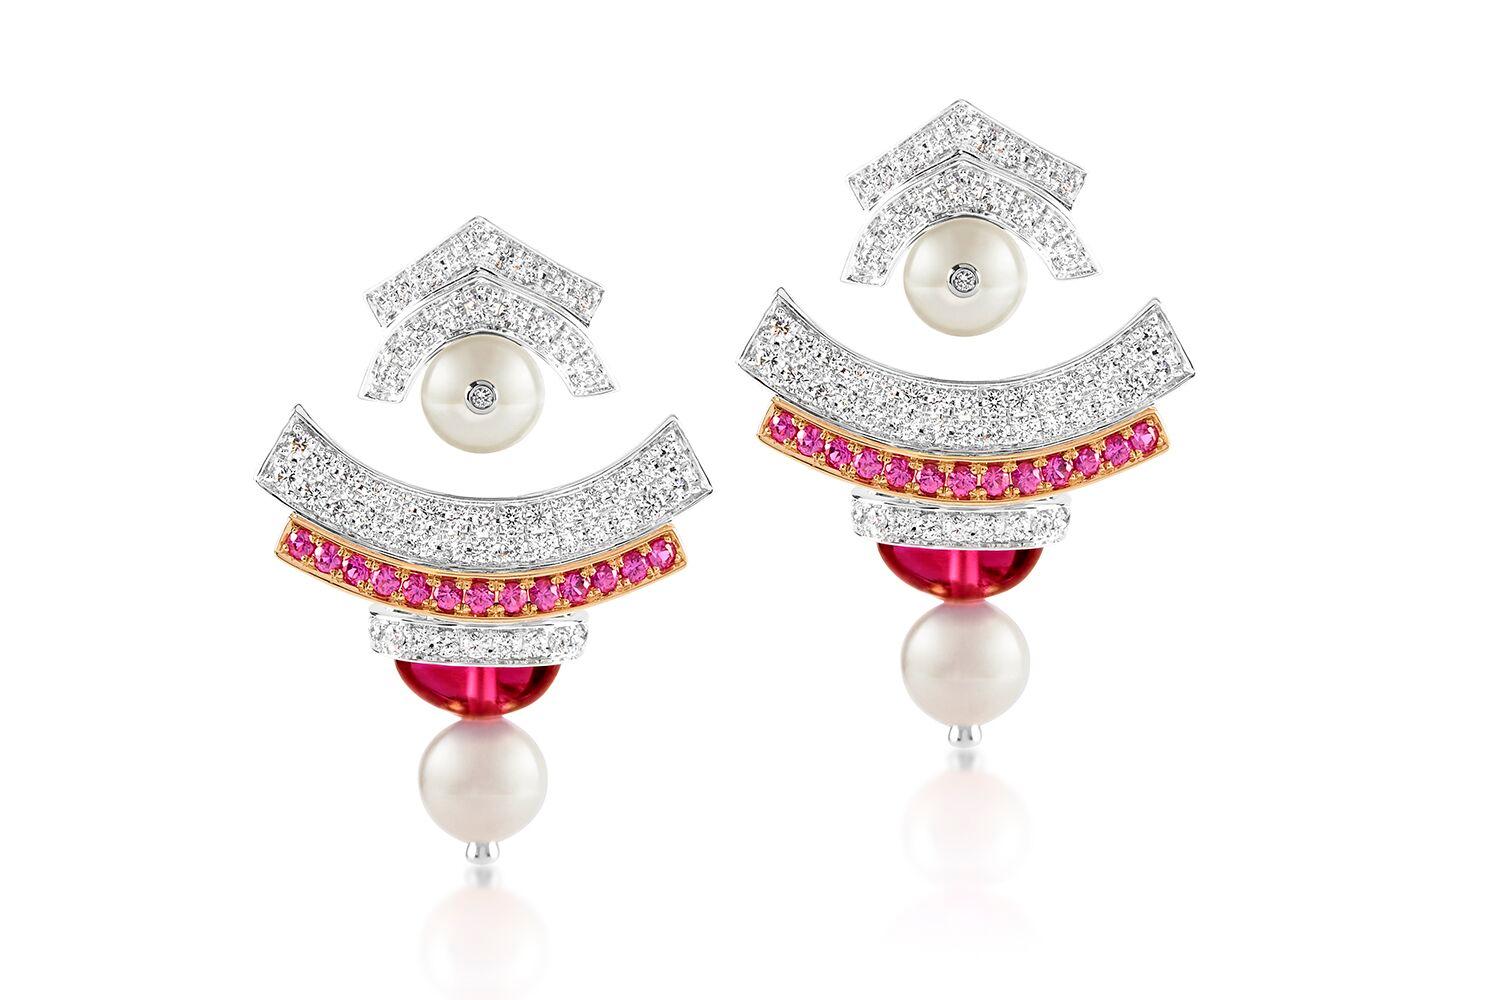 ANANYA CELESTE LAYERED EAR JACKET EARRINGS SET WITH PINK SAPPHIRES, TOURMALINE AND DIAMONDS


Set in 18K Rose gold and White gold


Total diamond weight: 0.92 ct
Color: F-G
Clarity: VVS1

Total pink sapphire weight: 0.37 ct

Total pink cabochon